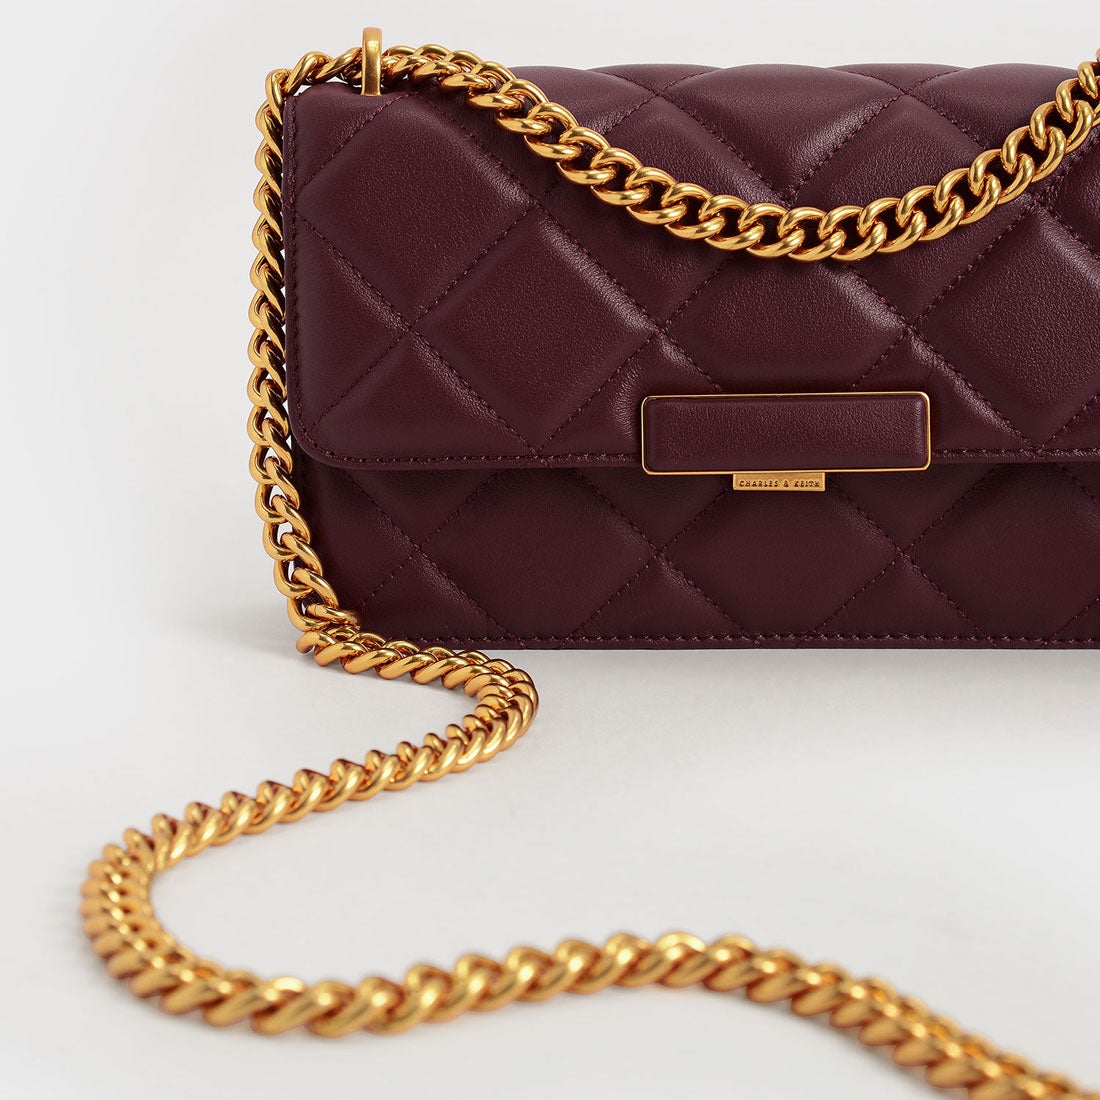 【2021 WINTER】キルテッドレザーチェーンハンドルバッグ / Quilted Leather Chain-Handle Bag  （Burgundy）